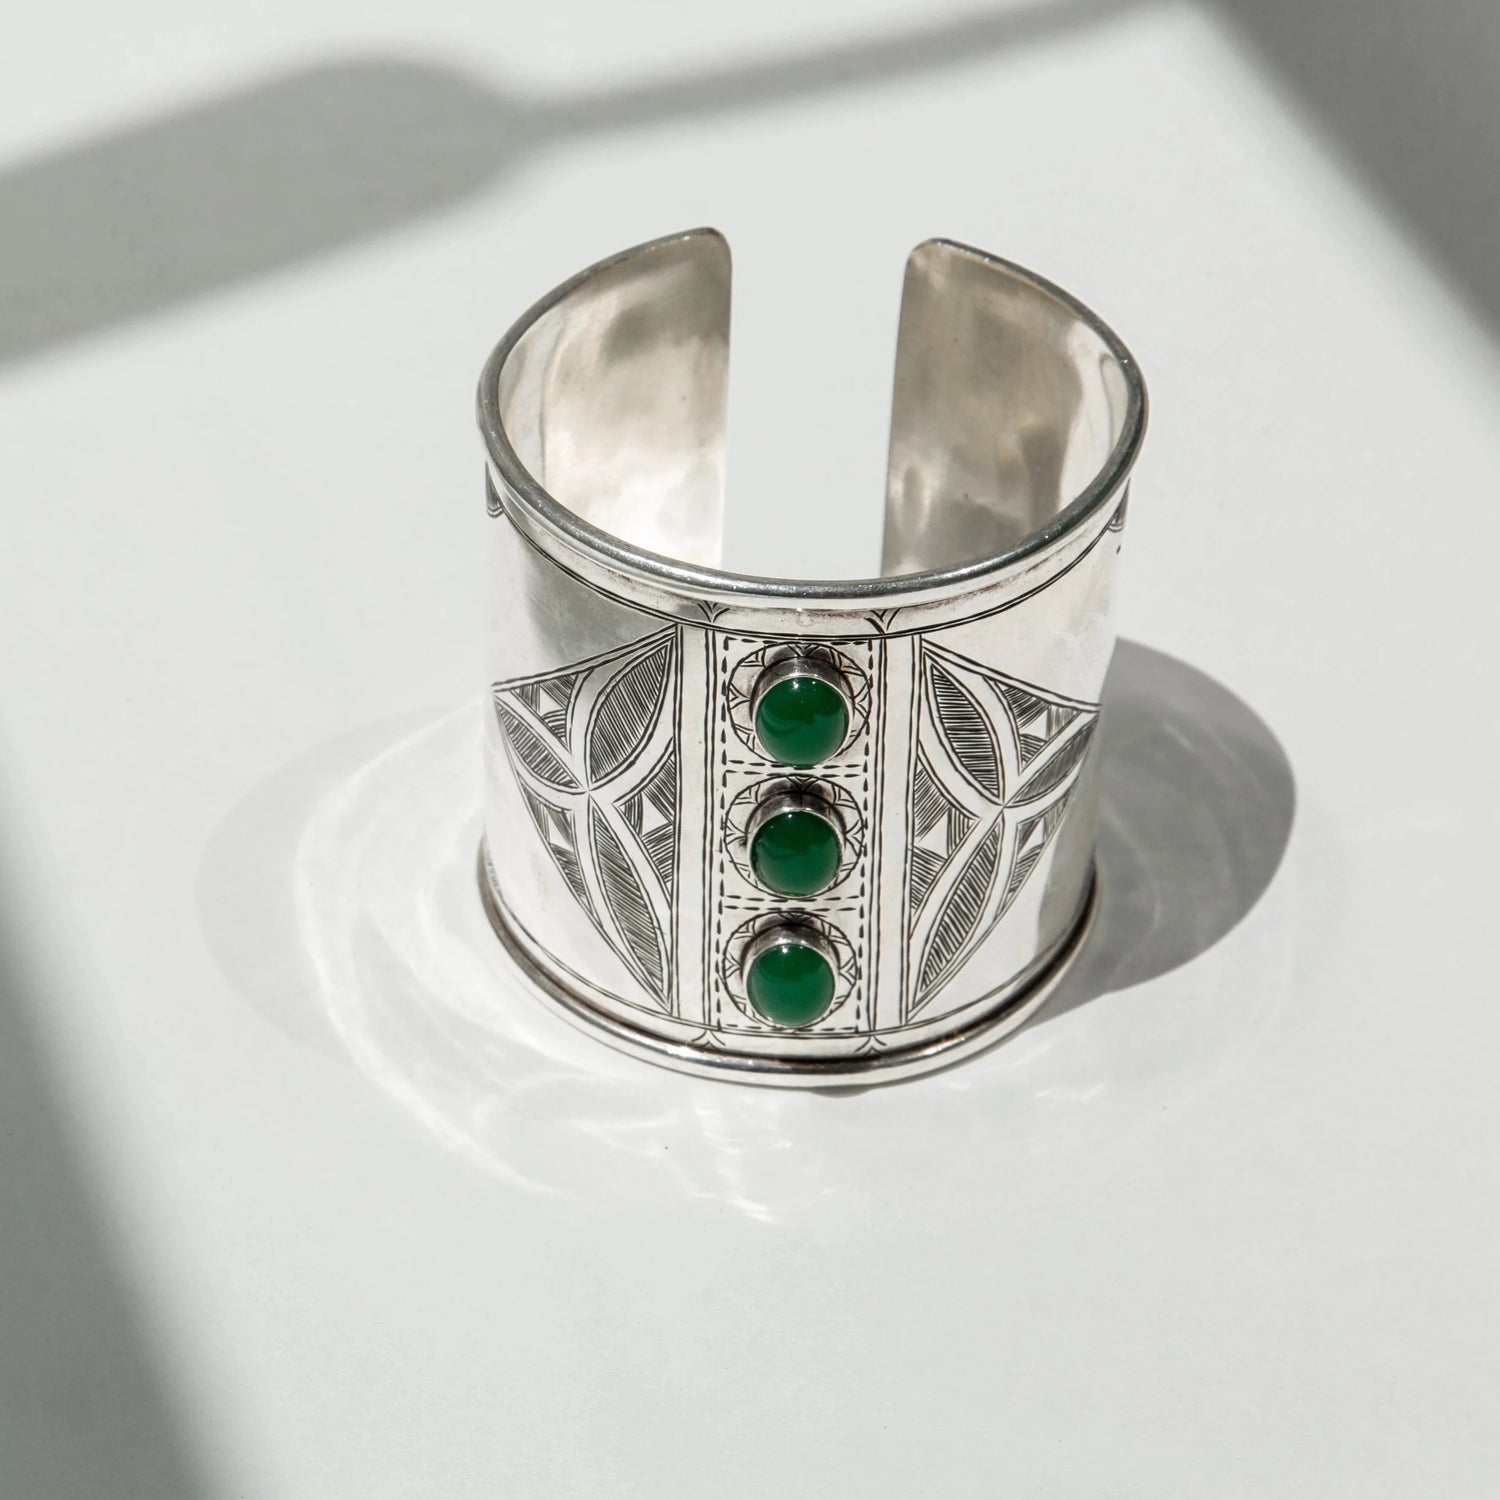 Cultural fusion: The Mint Tea Cuff Bracelet represents a beautiful fusion of Moroccan cultural traditions and contemporary fashion, blending elements of hospitality and style into a captivating accessory.